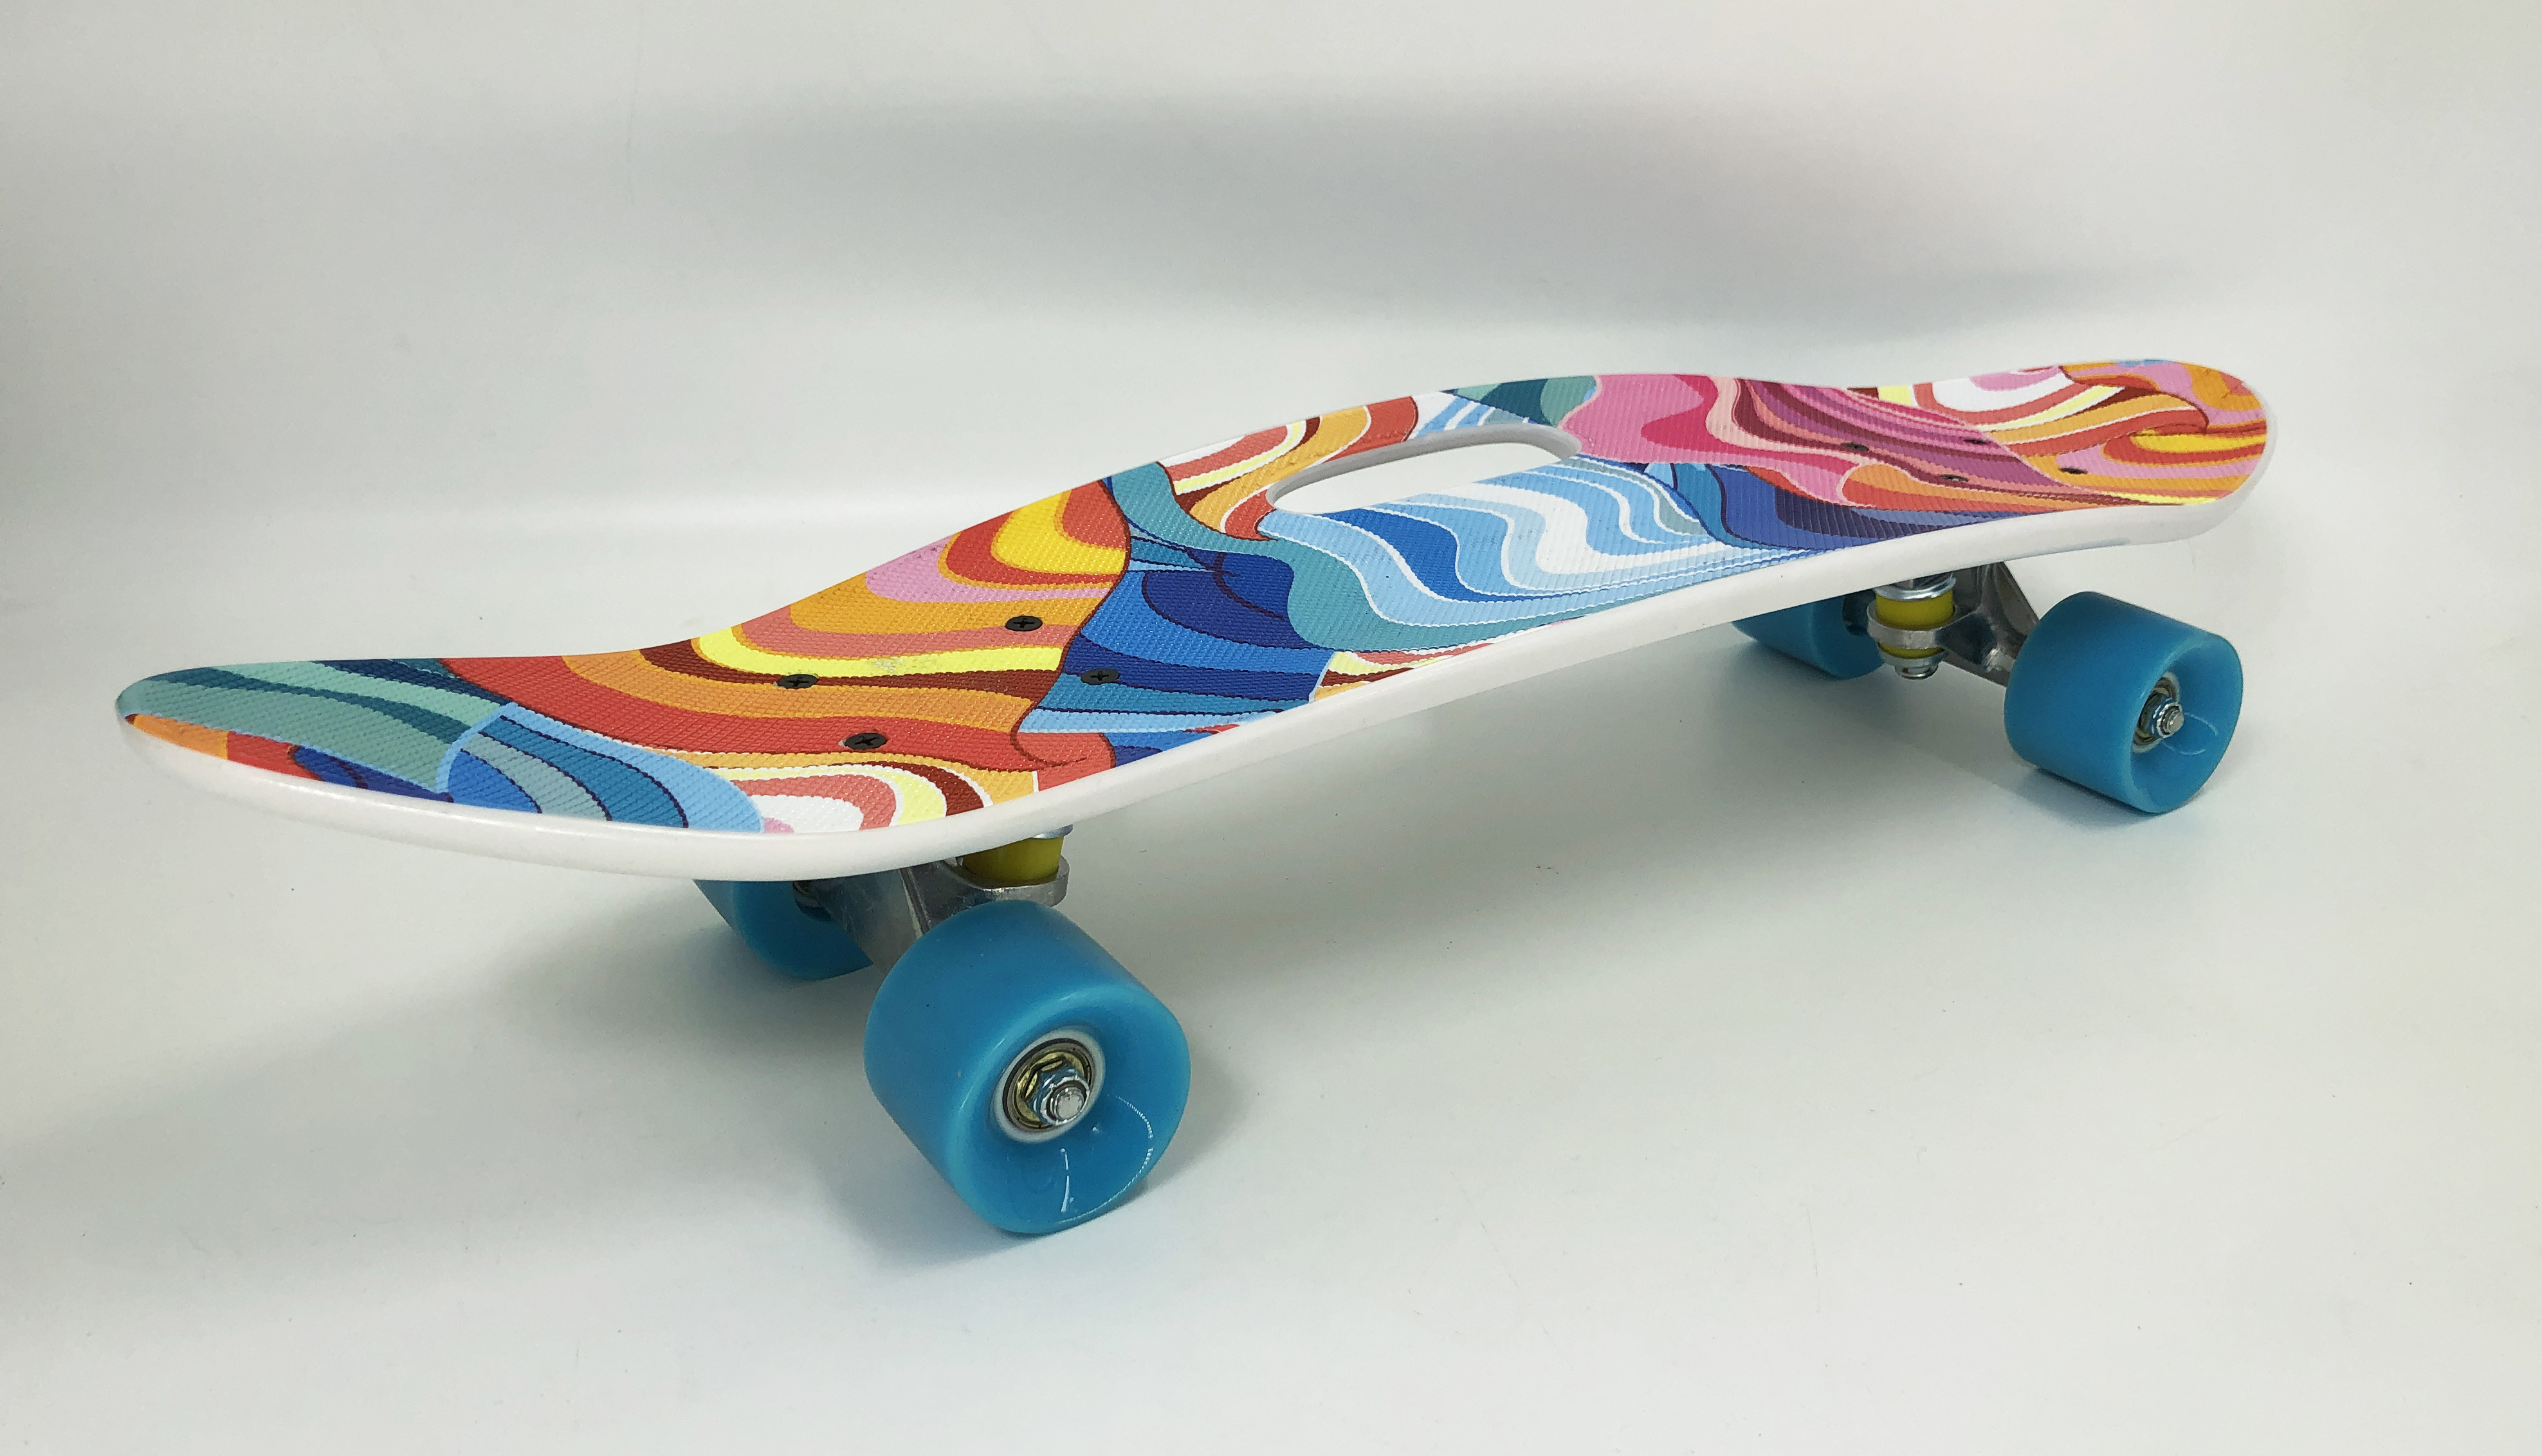 Skateboard with Molding Pattern (GS-SB-X1S, 26")